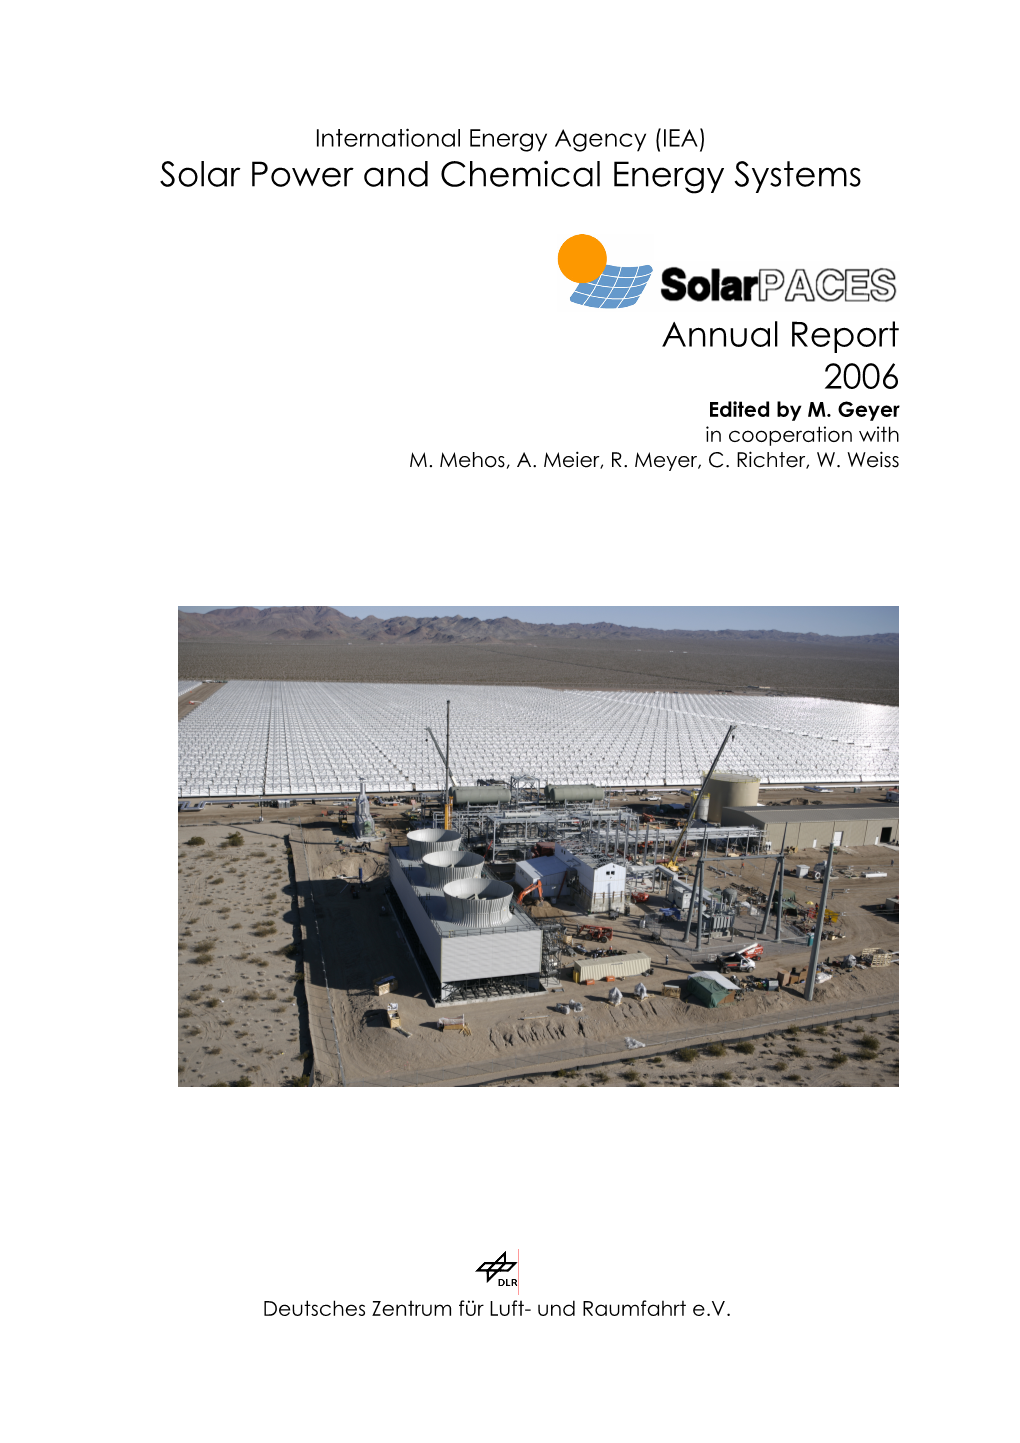 Annual Report 2006 Solar Power and Chemical Energy Systems